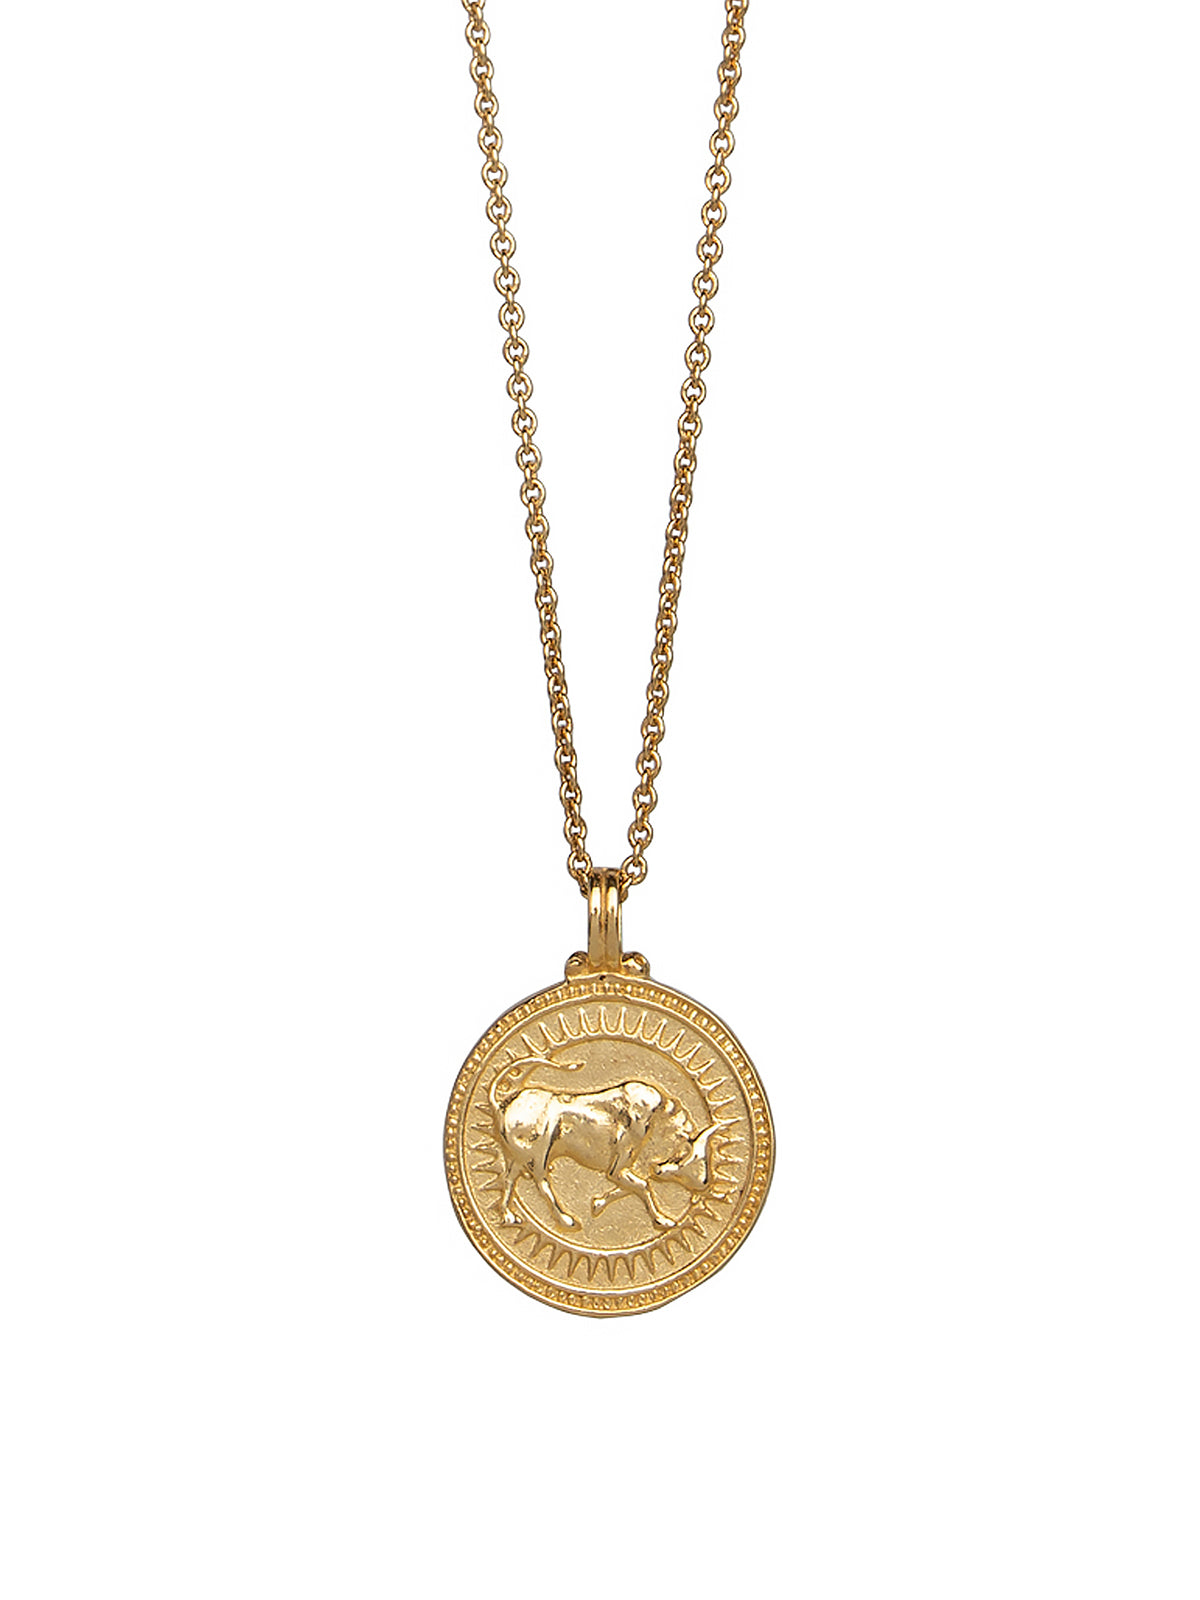 Taurus. 18ct Solid Gold Star Sign Necklace. The pendant features an Evil Eye on the back to ward off any naughty behavior aimed at you, Our logo and the 750 Hallmark for 18ct Gold.